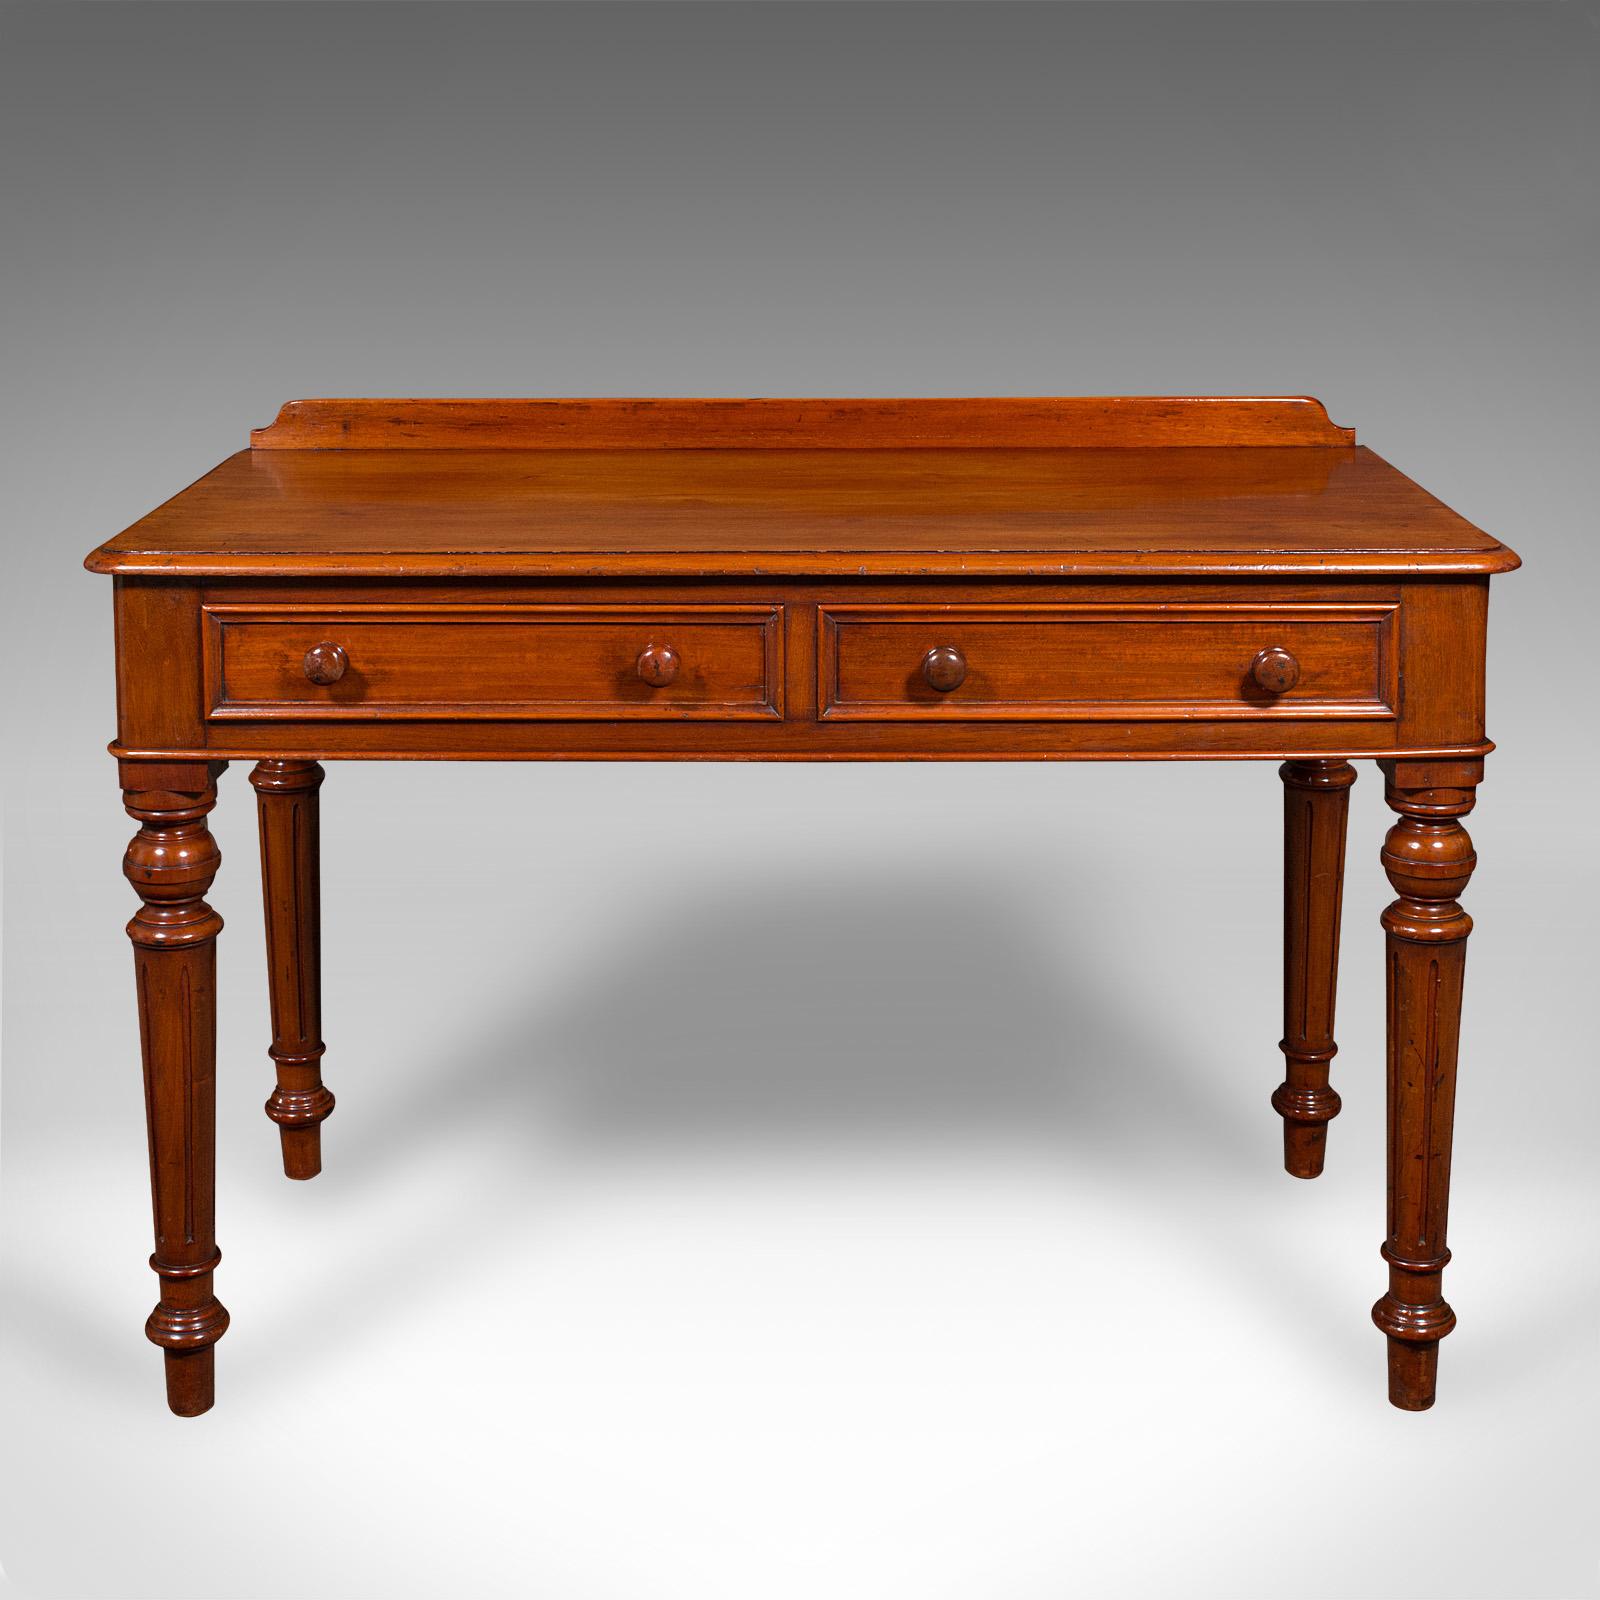 This is an antique ladies writing desk. An English, mahogany correspondence or side table, dating to the mid Victorian period, circa 1870.

Beautifully presented desk with fine craftsmanship
Displays a desirable aged patina and in good